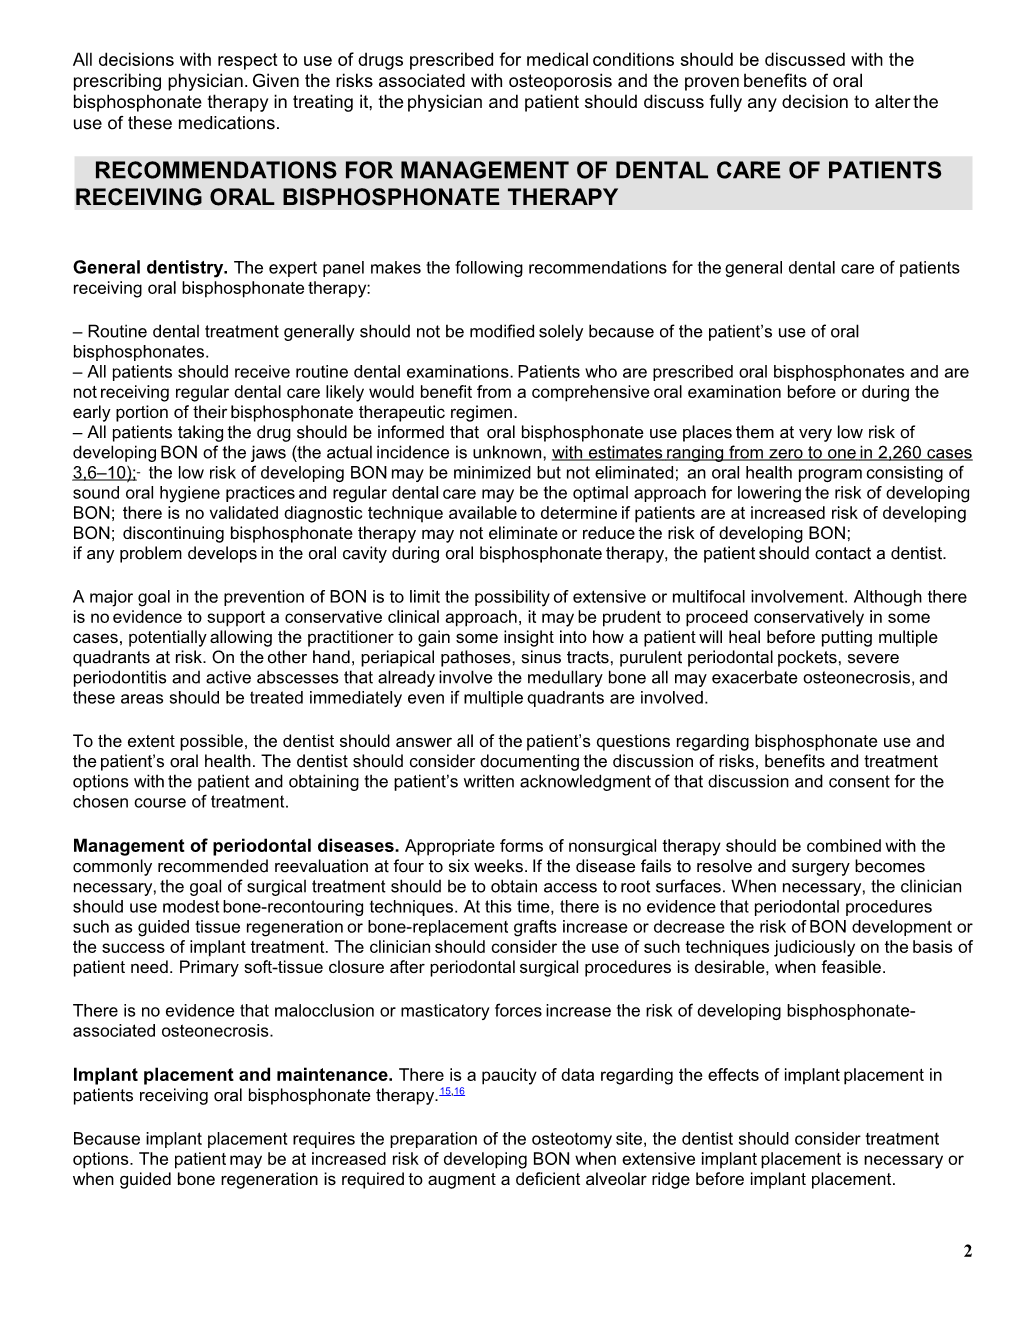 Updated Recommendations for Managing the Care of Patients Receiving Oral Bisphosphonate